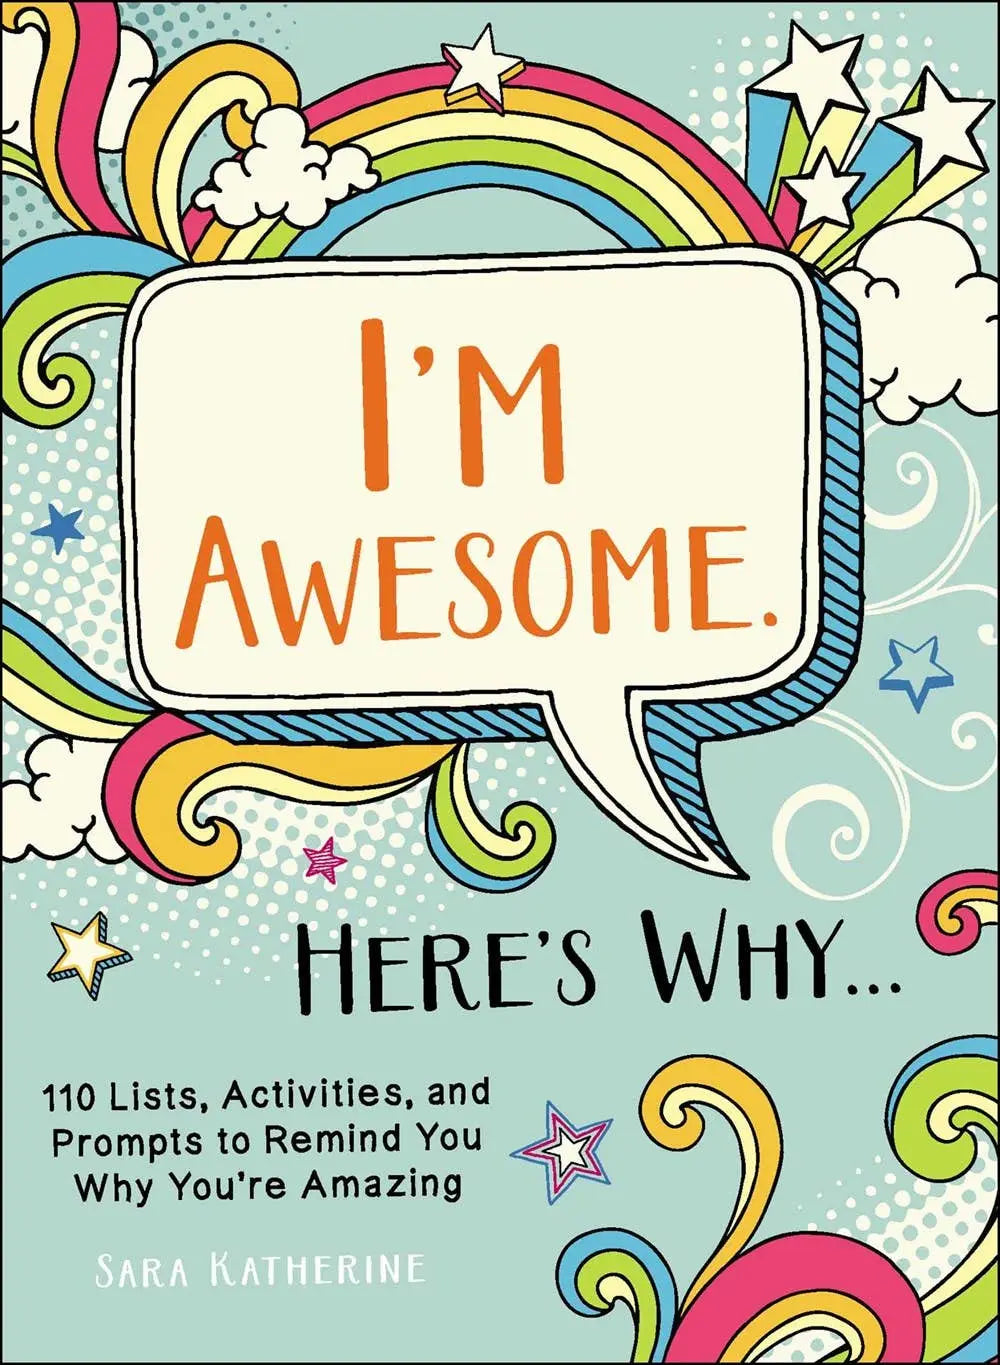 I'm Awesome. Here's Why: 110 Lists, Activities, and Prompts Microcosm Publishing & Distribution